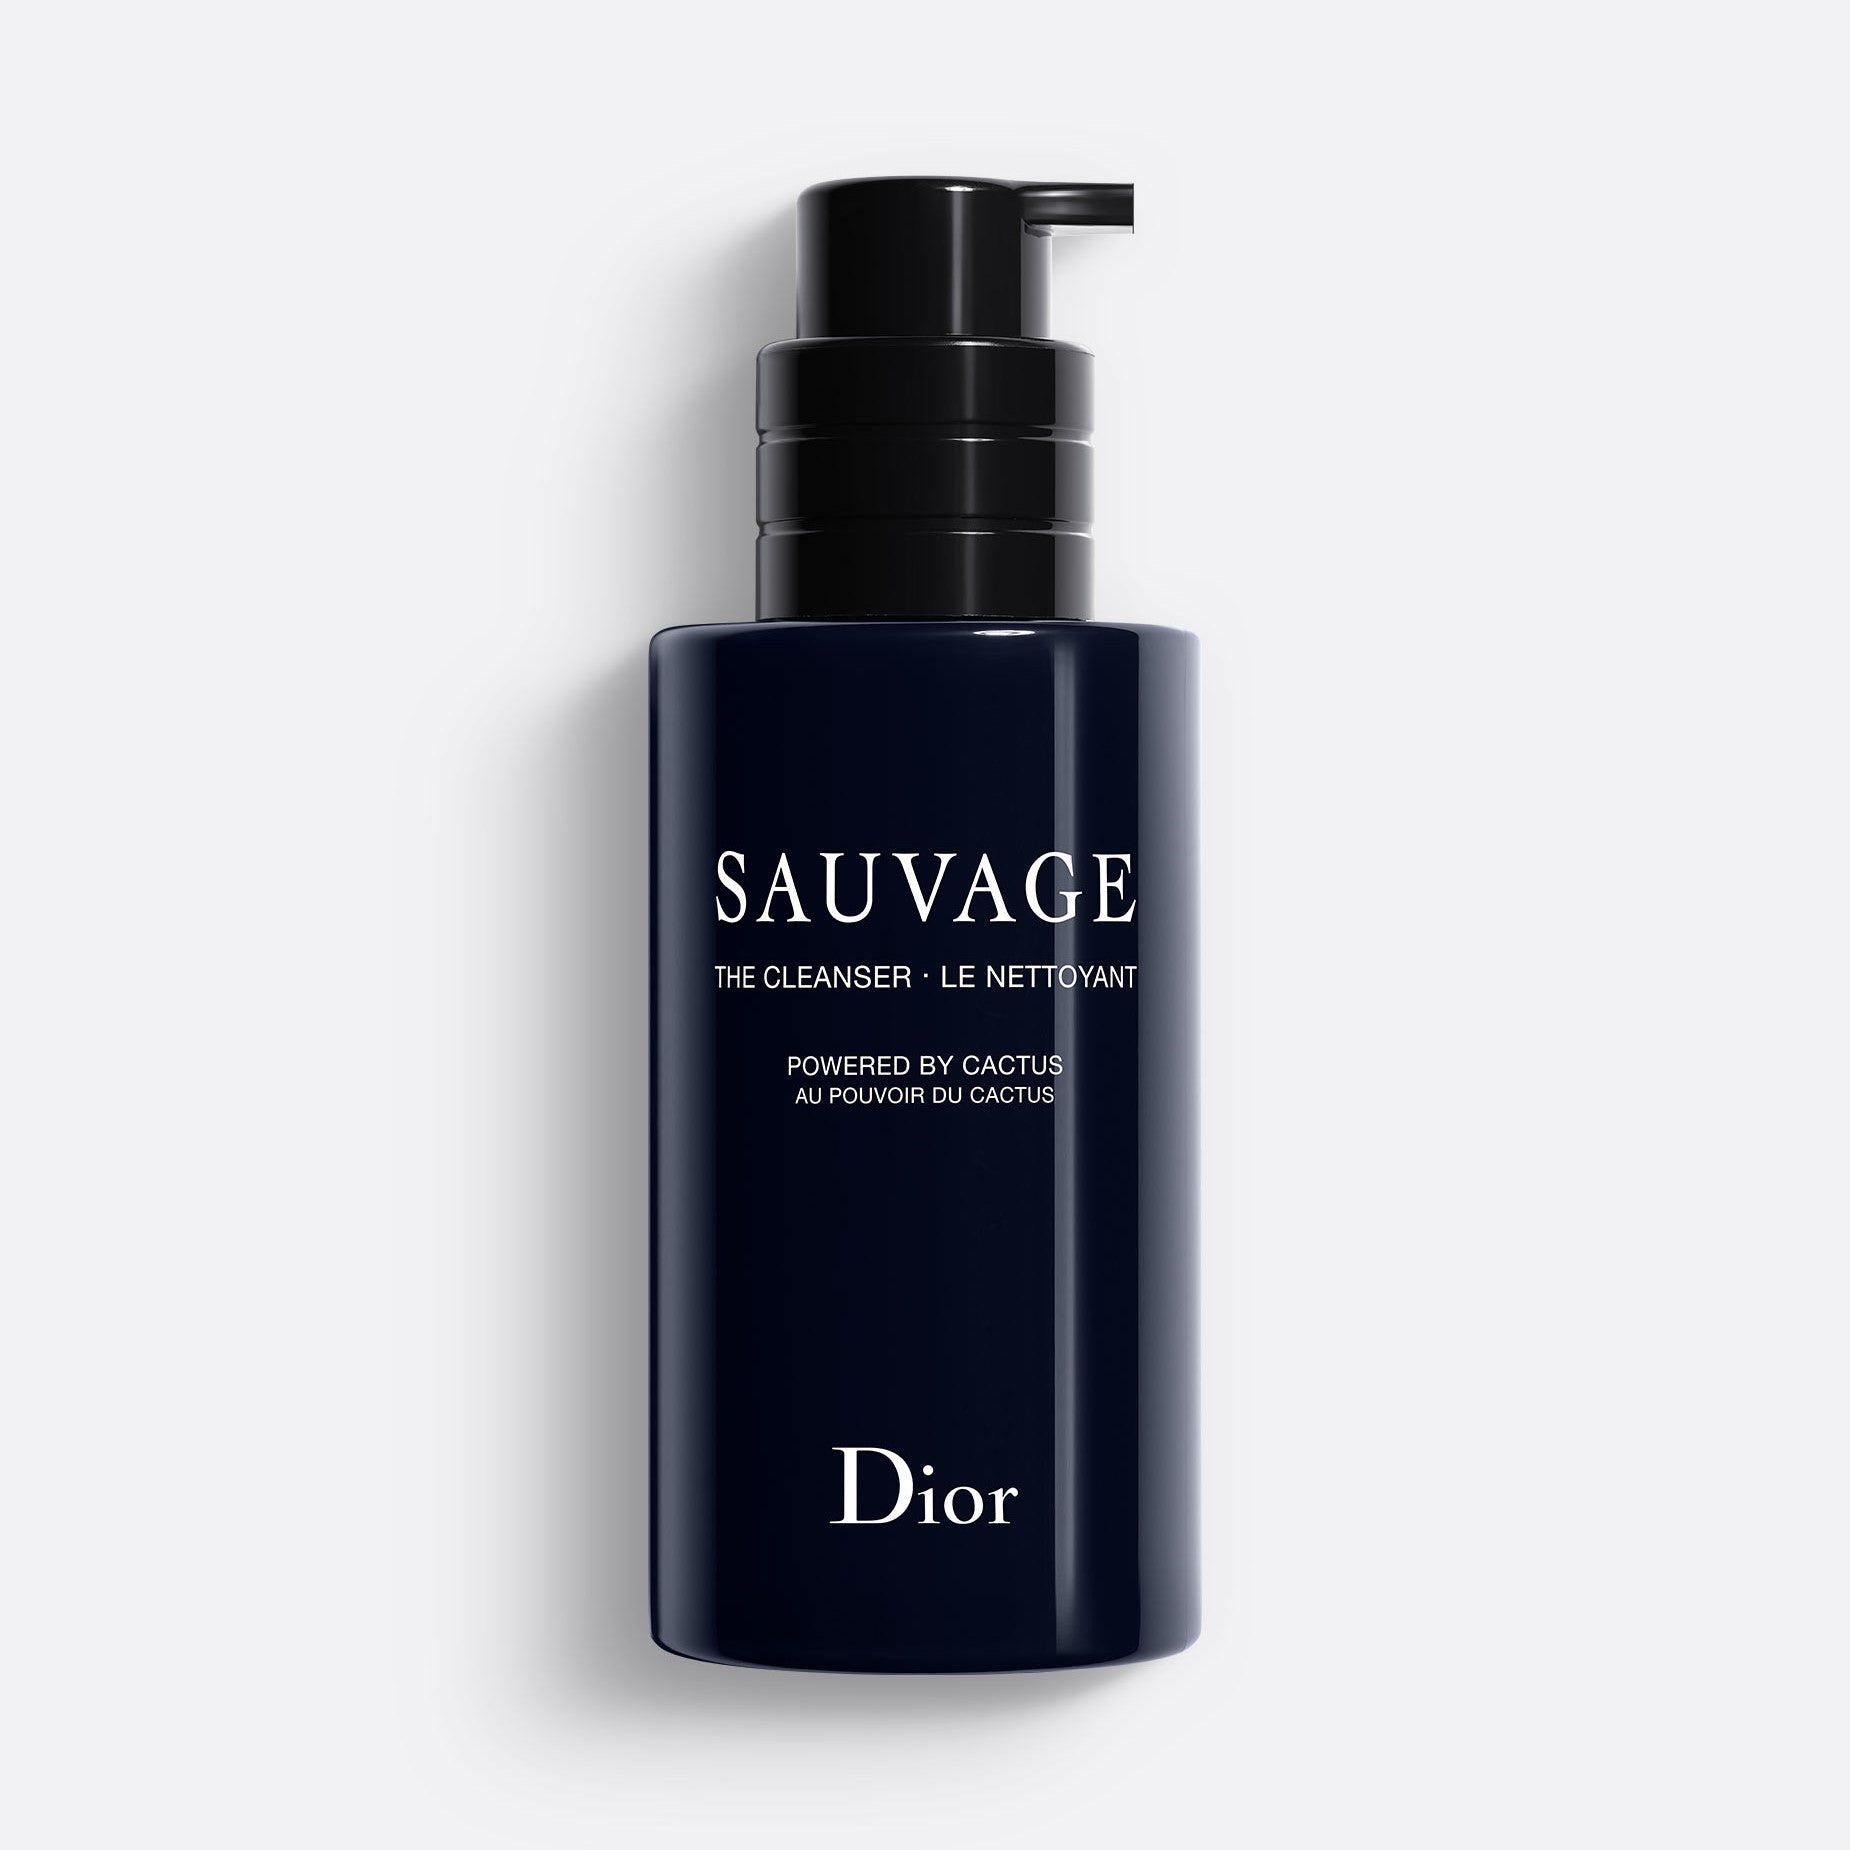 SAUVAGE THE CLEANSER | Face Cleanser - Black Charcoal and Cactus - Purifying and Non-Drying